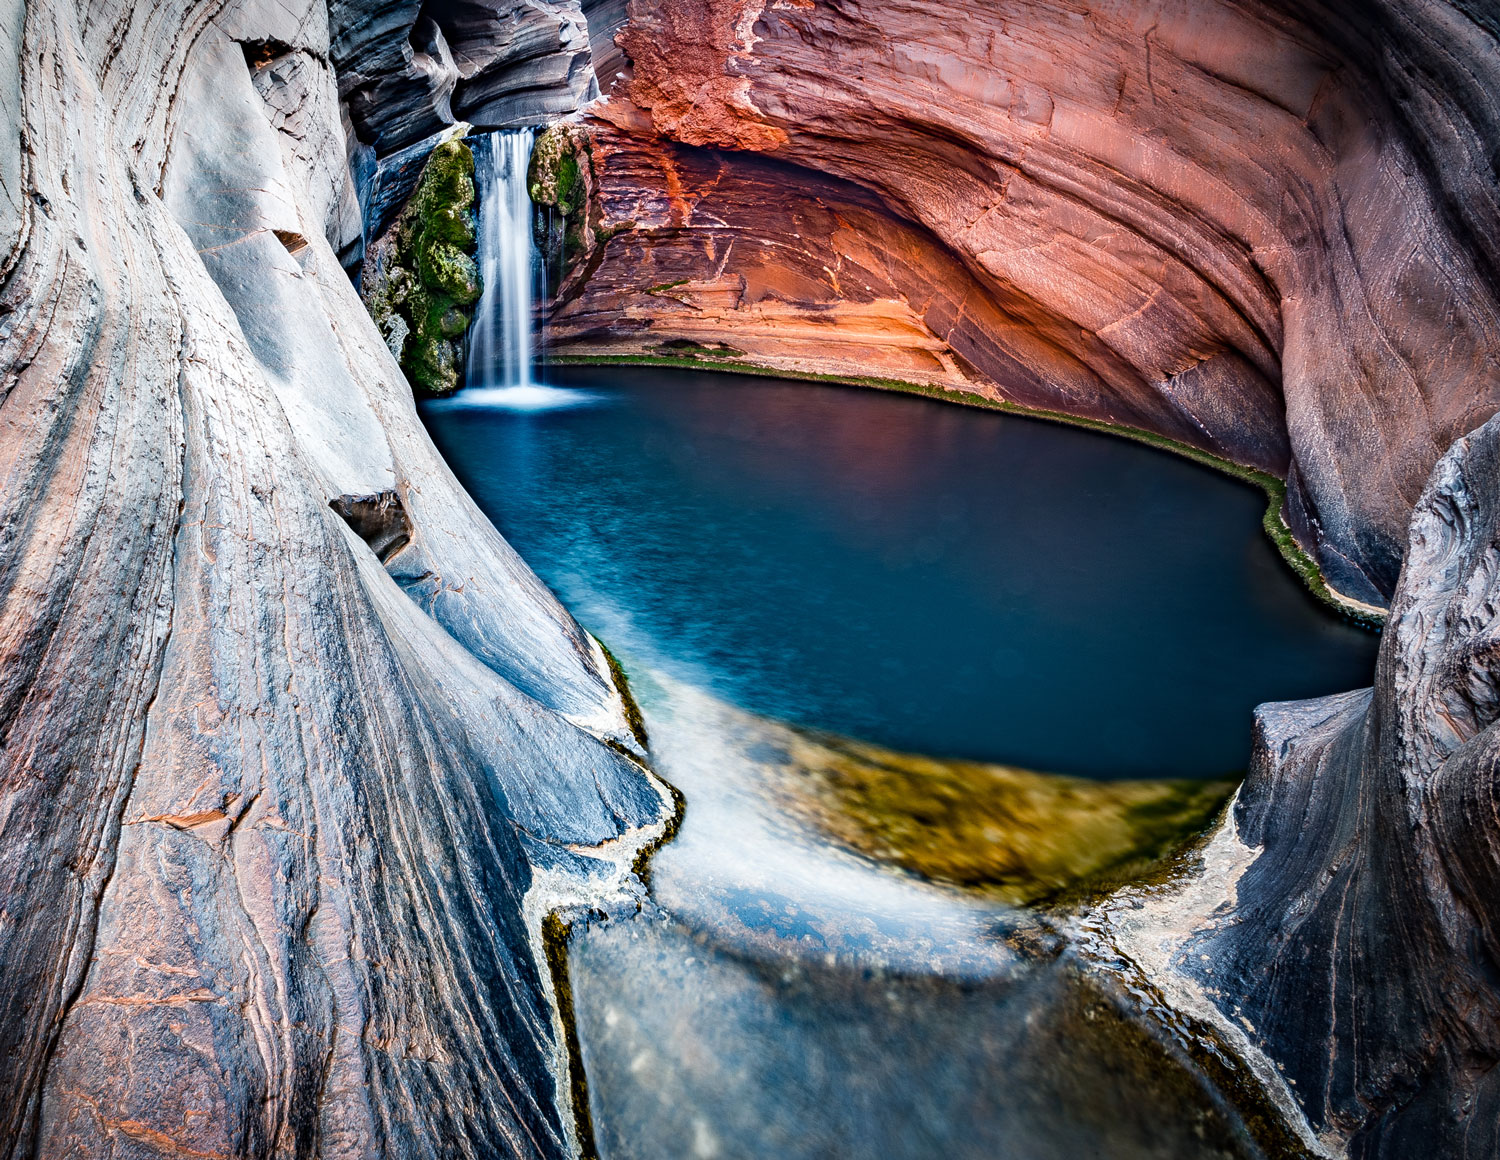 A waterfall fills a small pool inside a rocky area of gorges at Karijini National Park